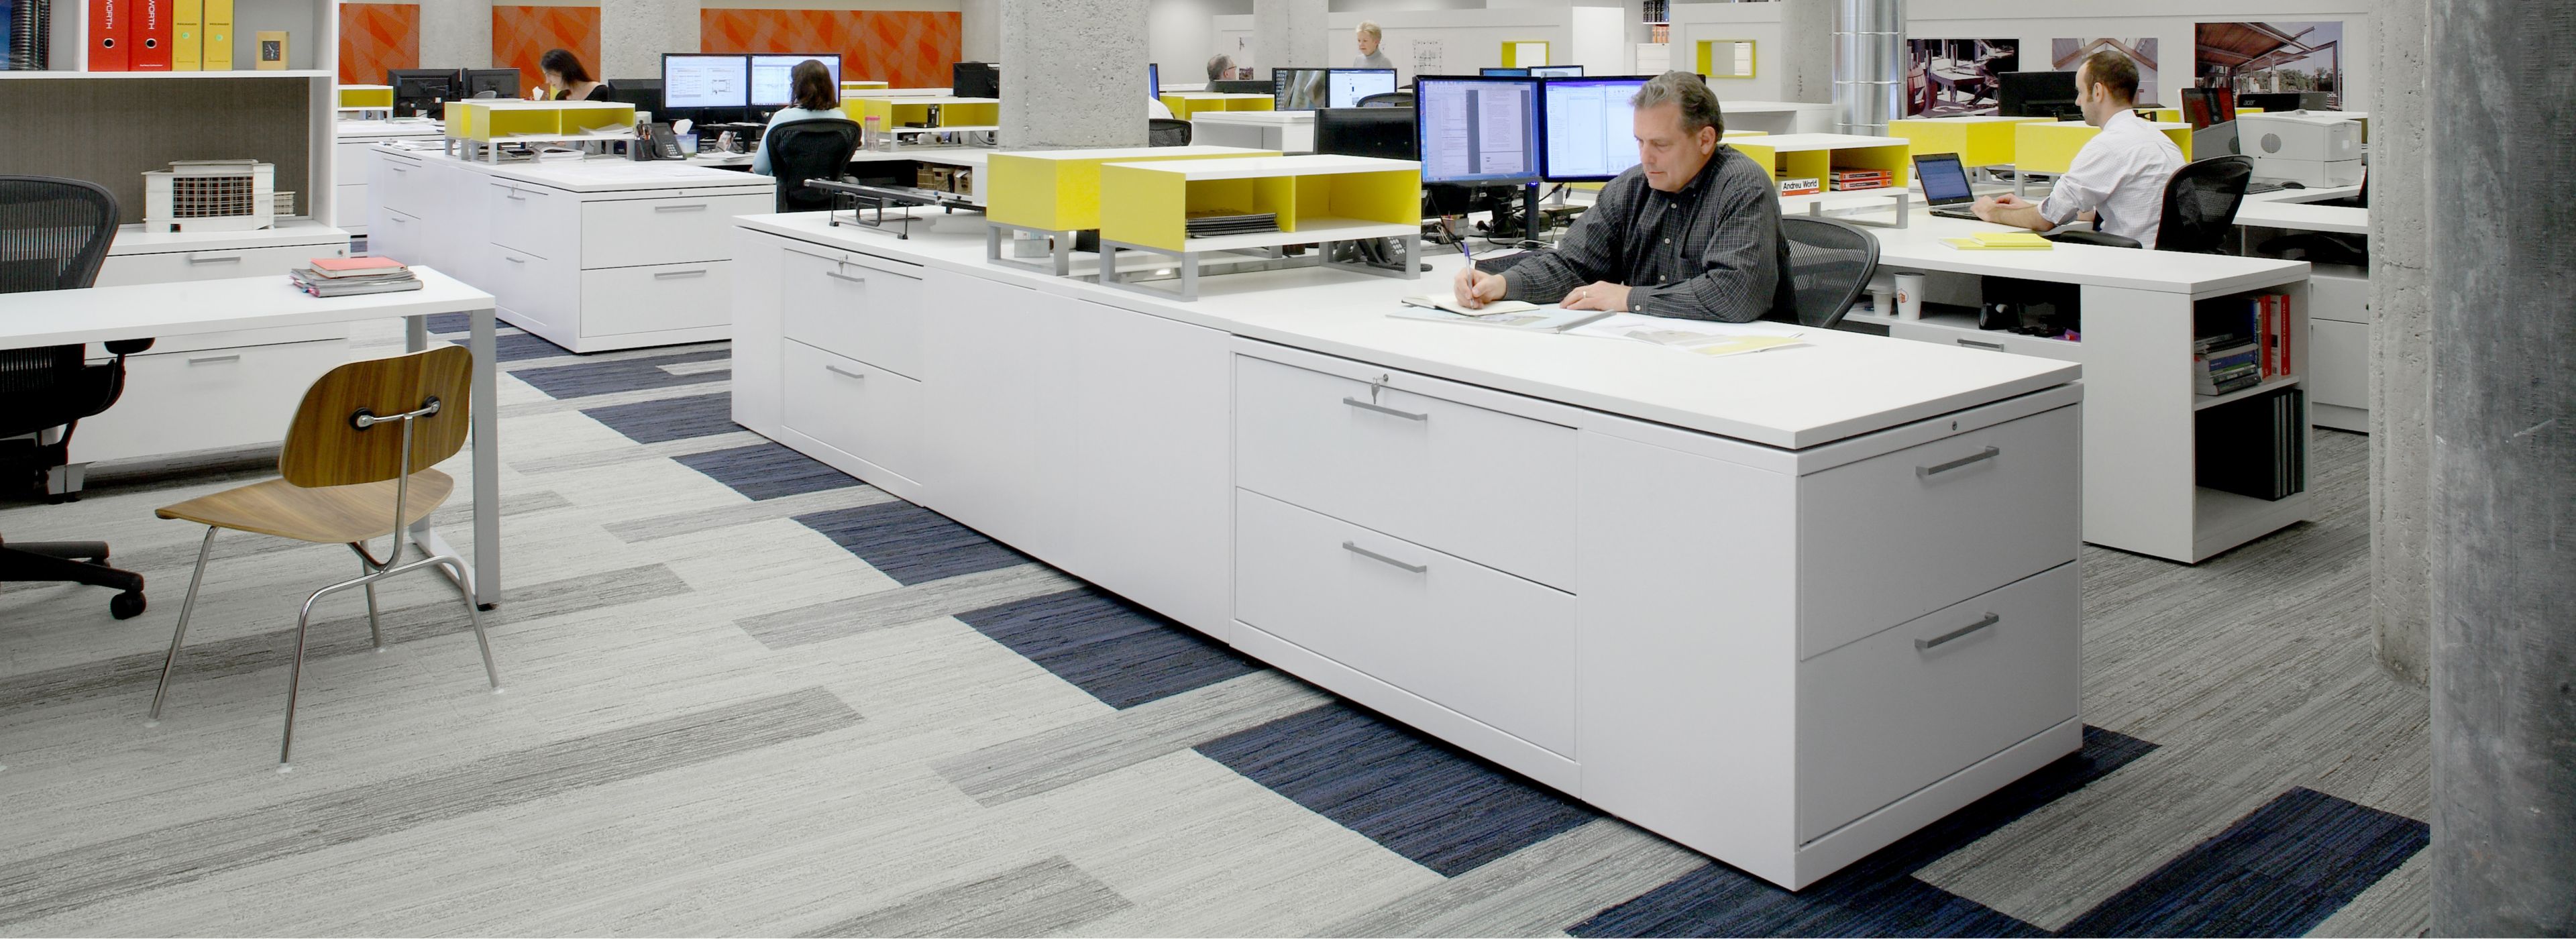 Interface Permian carpet tile in open office with men and women working at desks imagen número 1